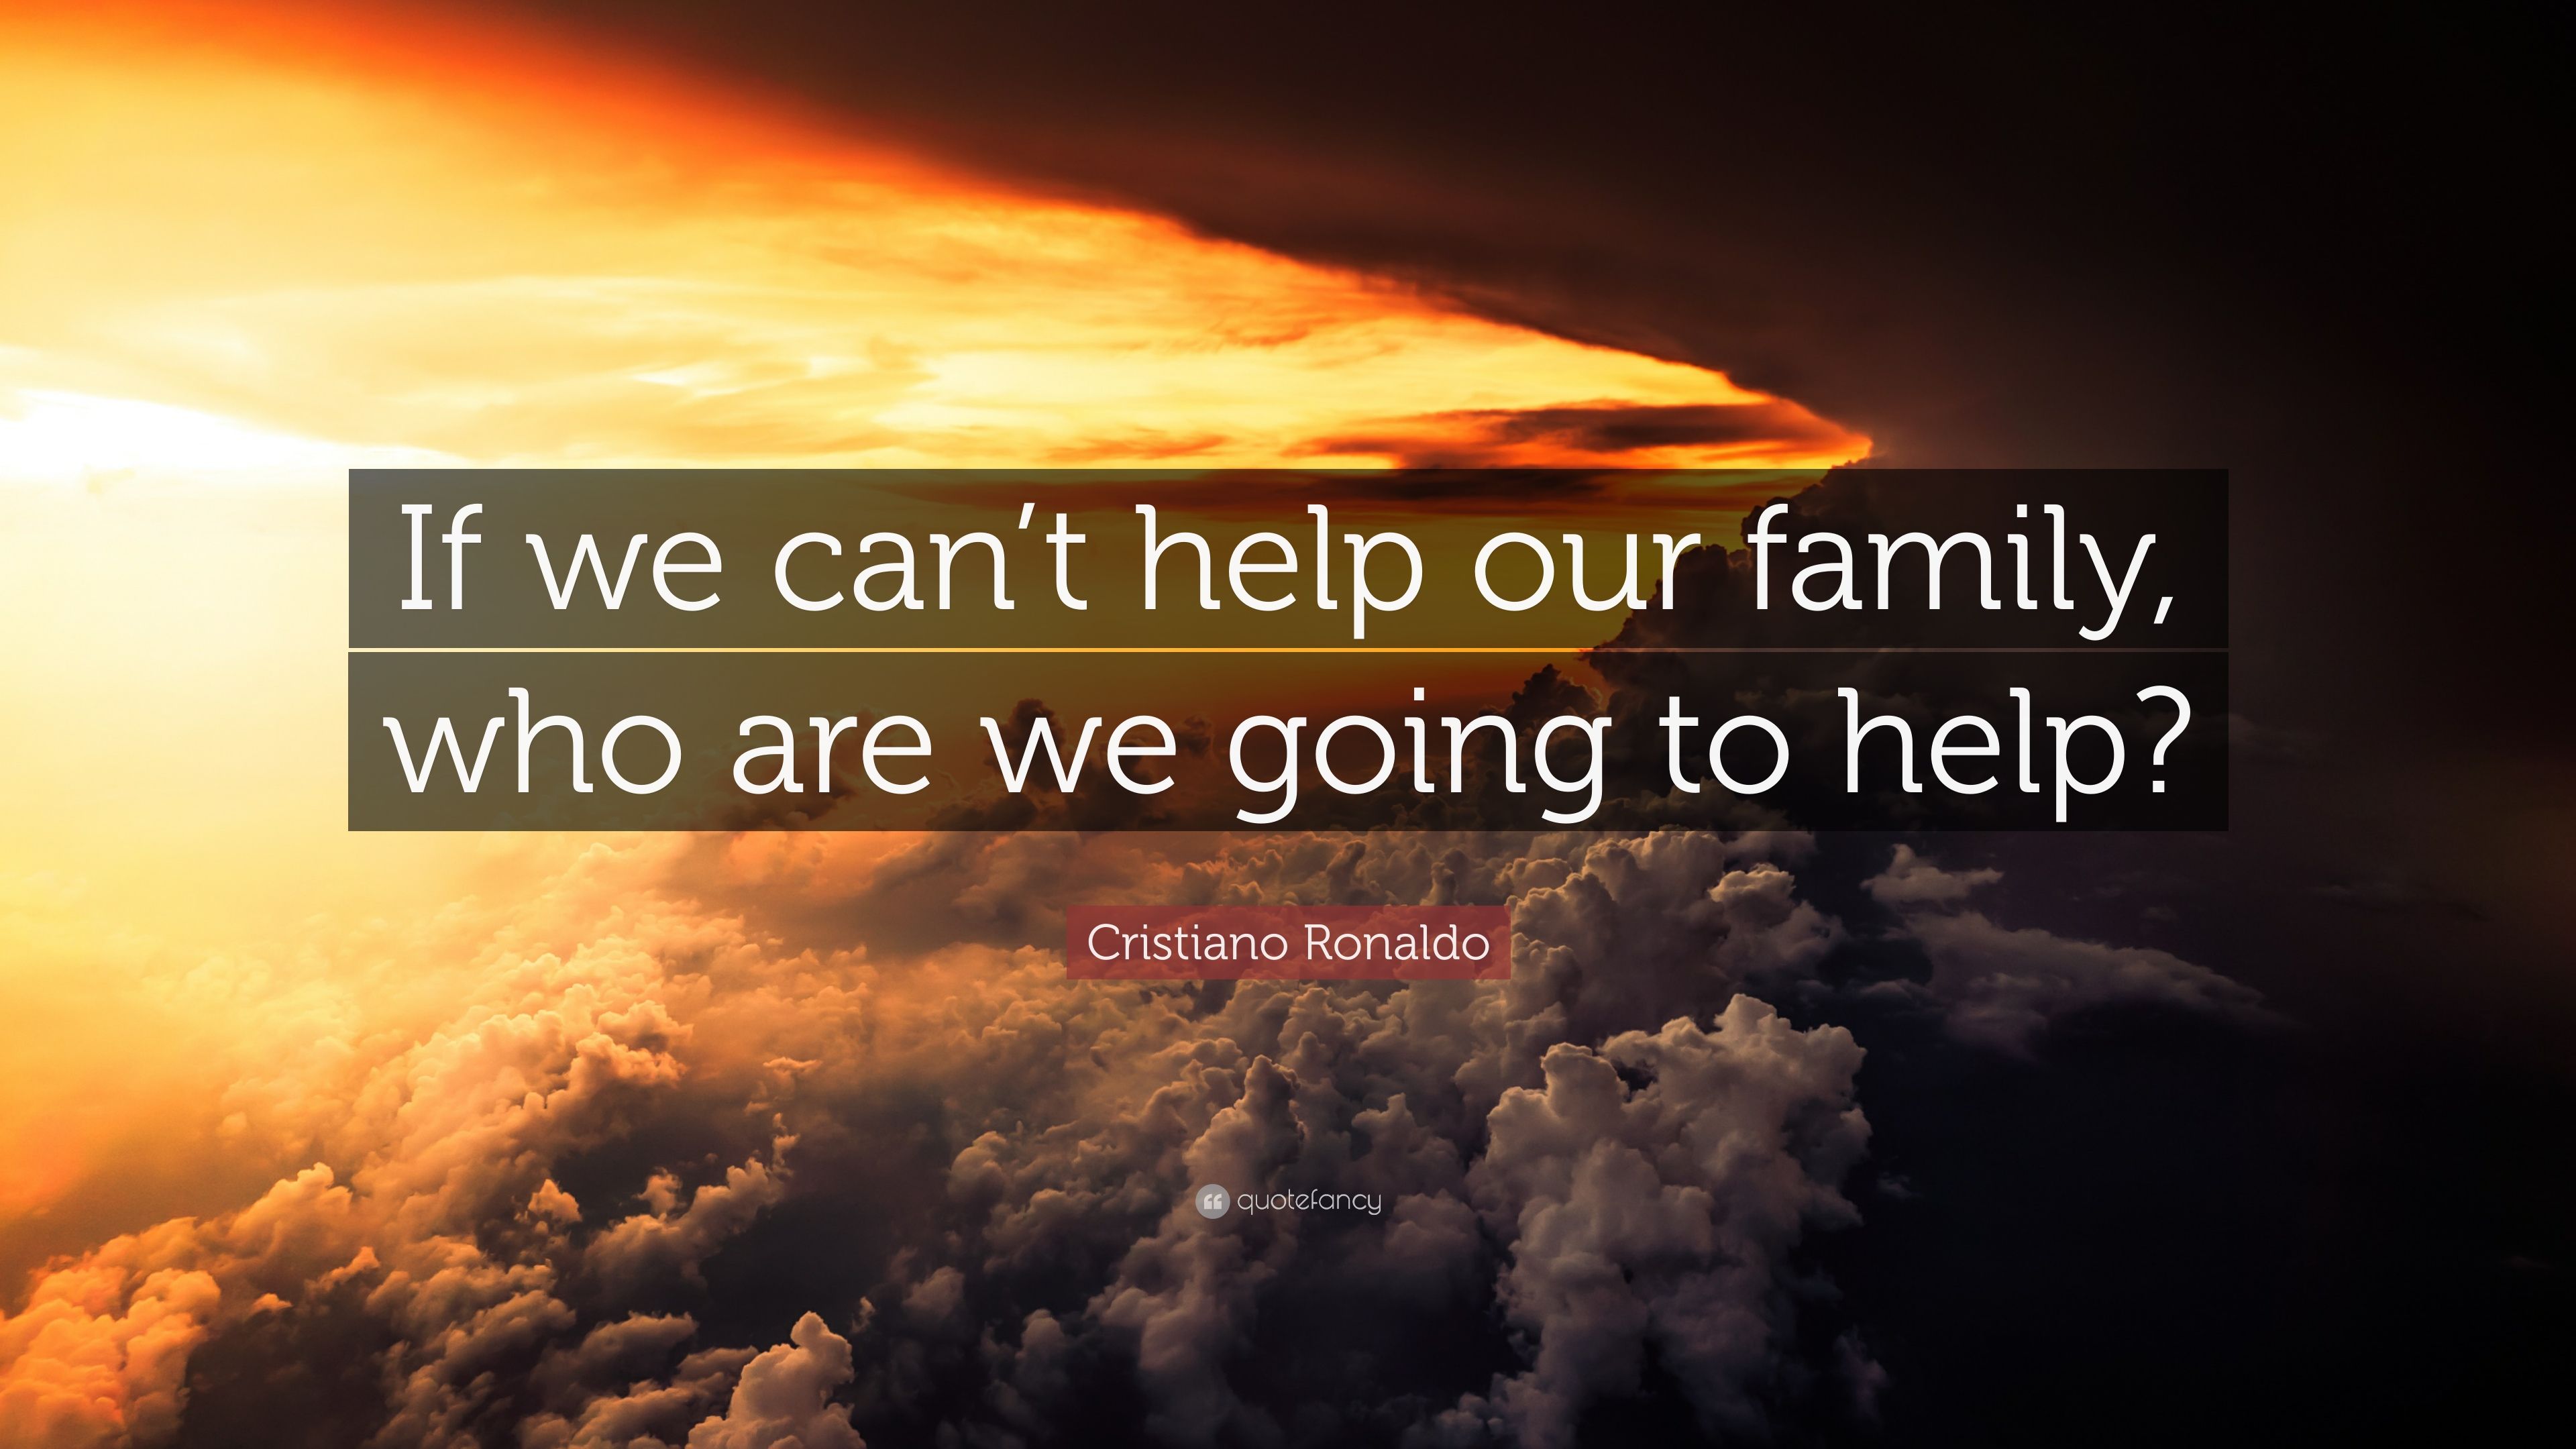 Cristiano Ronaldo Quote: “If we can't help our family, who are we going to help?” (10 wallpaper)